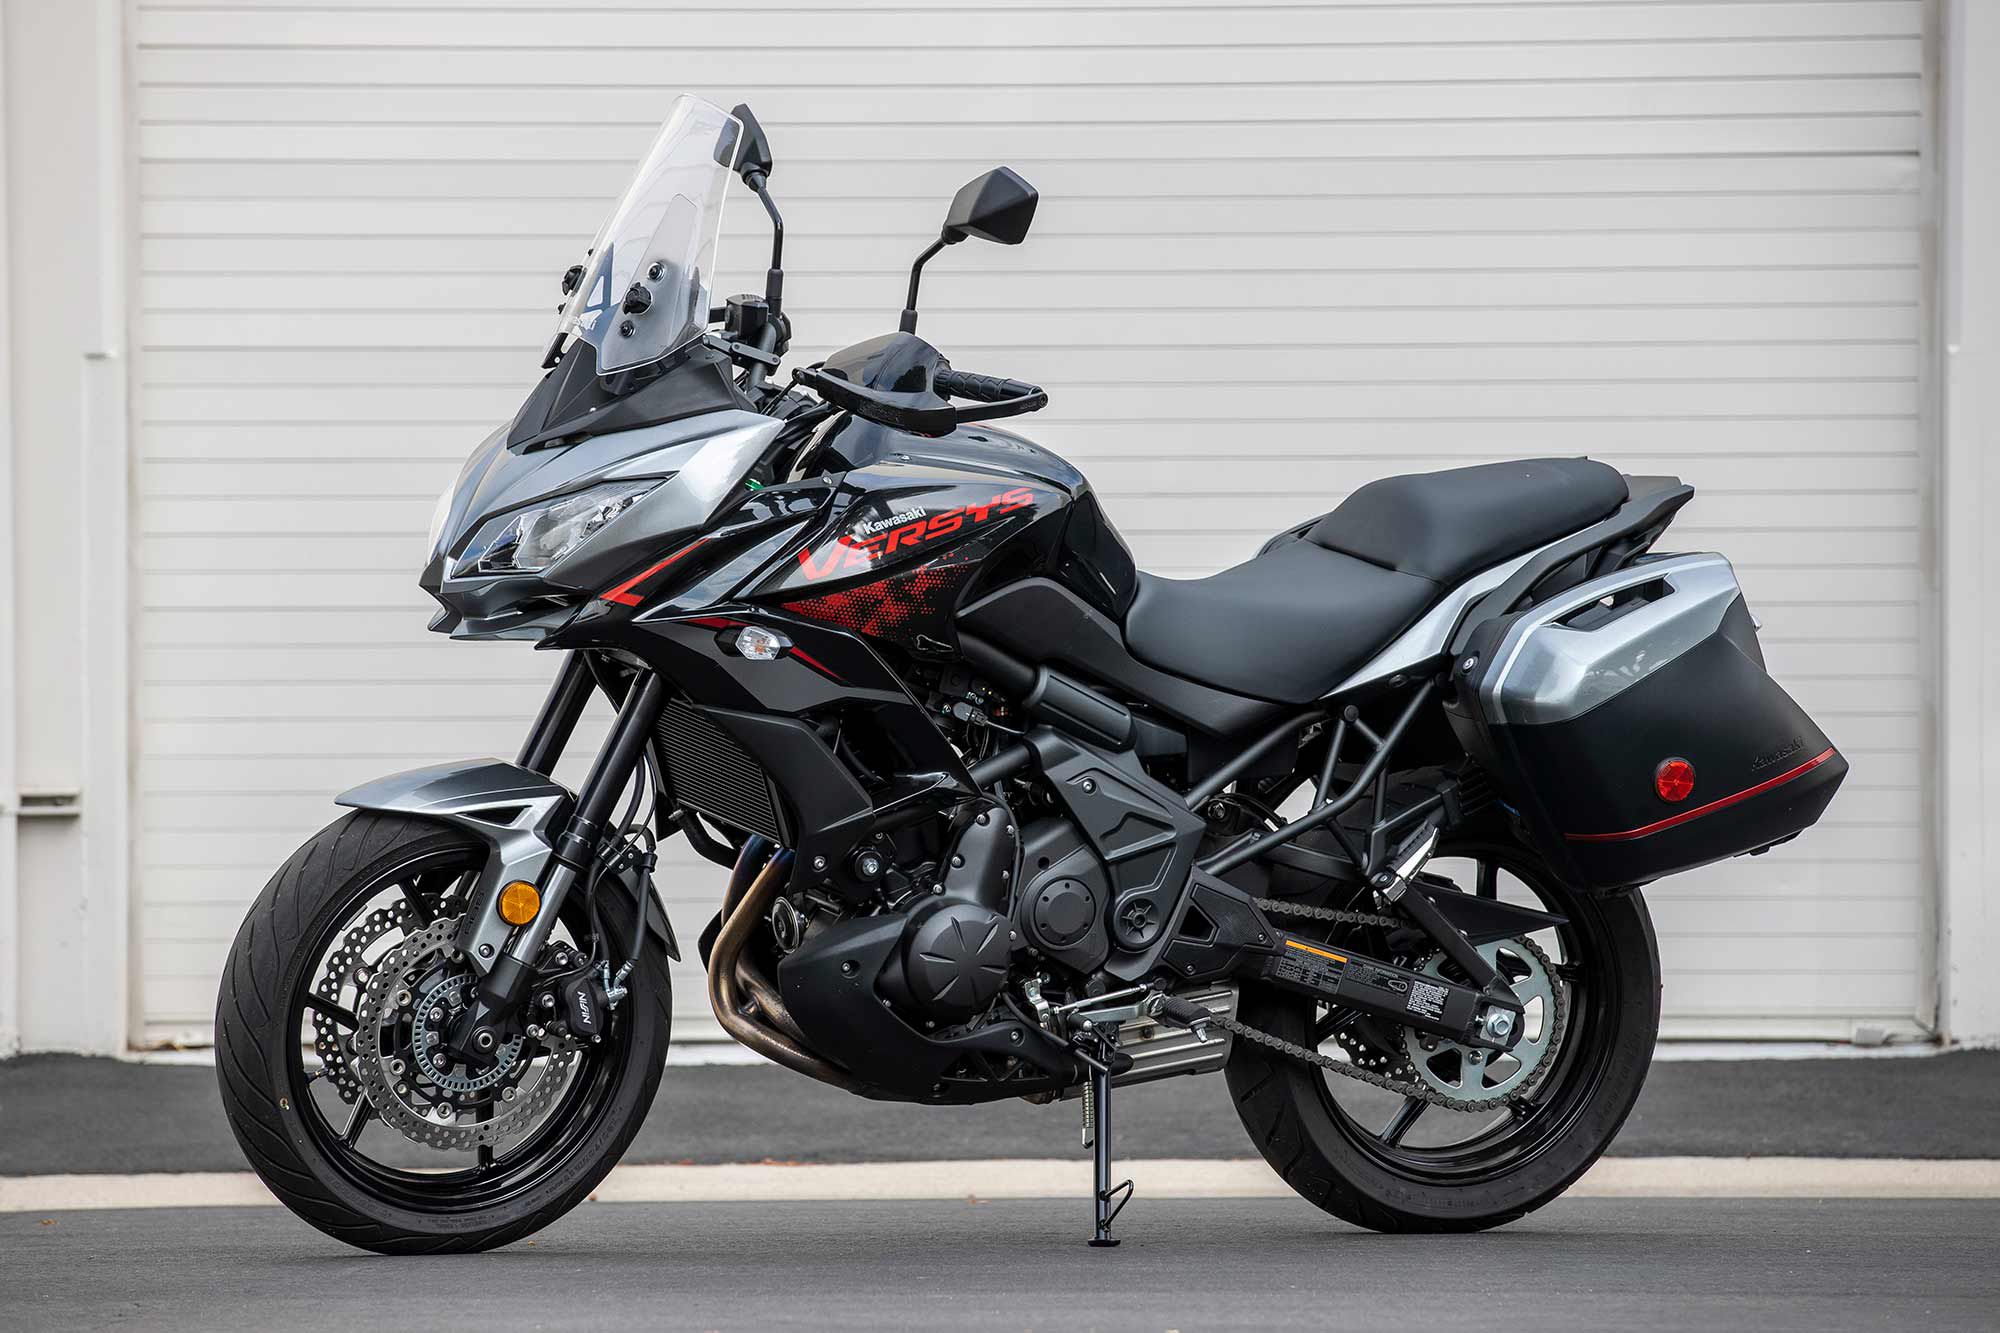 In this episode of <i>MC Commute</i>, we take the 2021 Kawasaki Versys 650 LT for a trip to the <i>Motorcyclist</i> HQ.